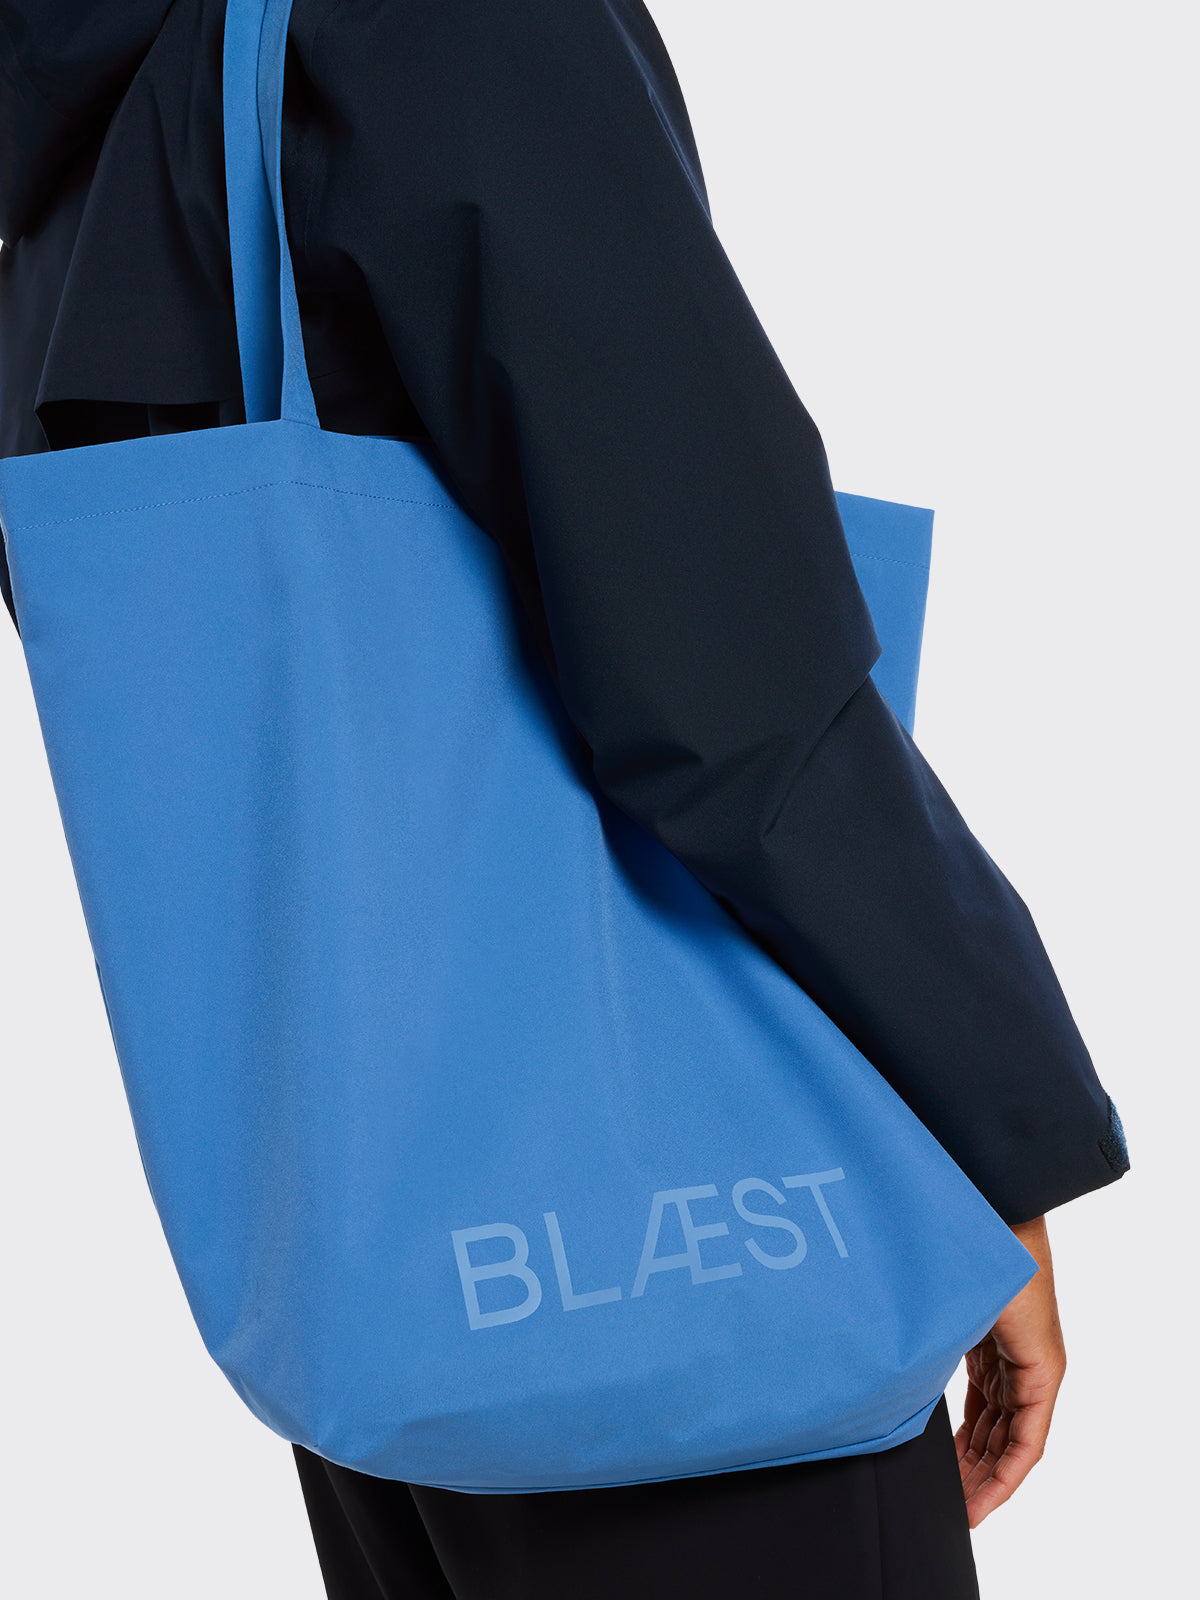 Moa tote bag in the color Coronet Blue from Blæst